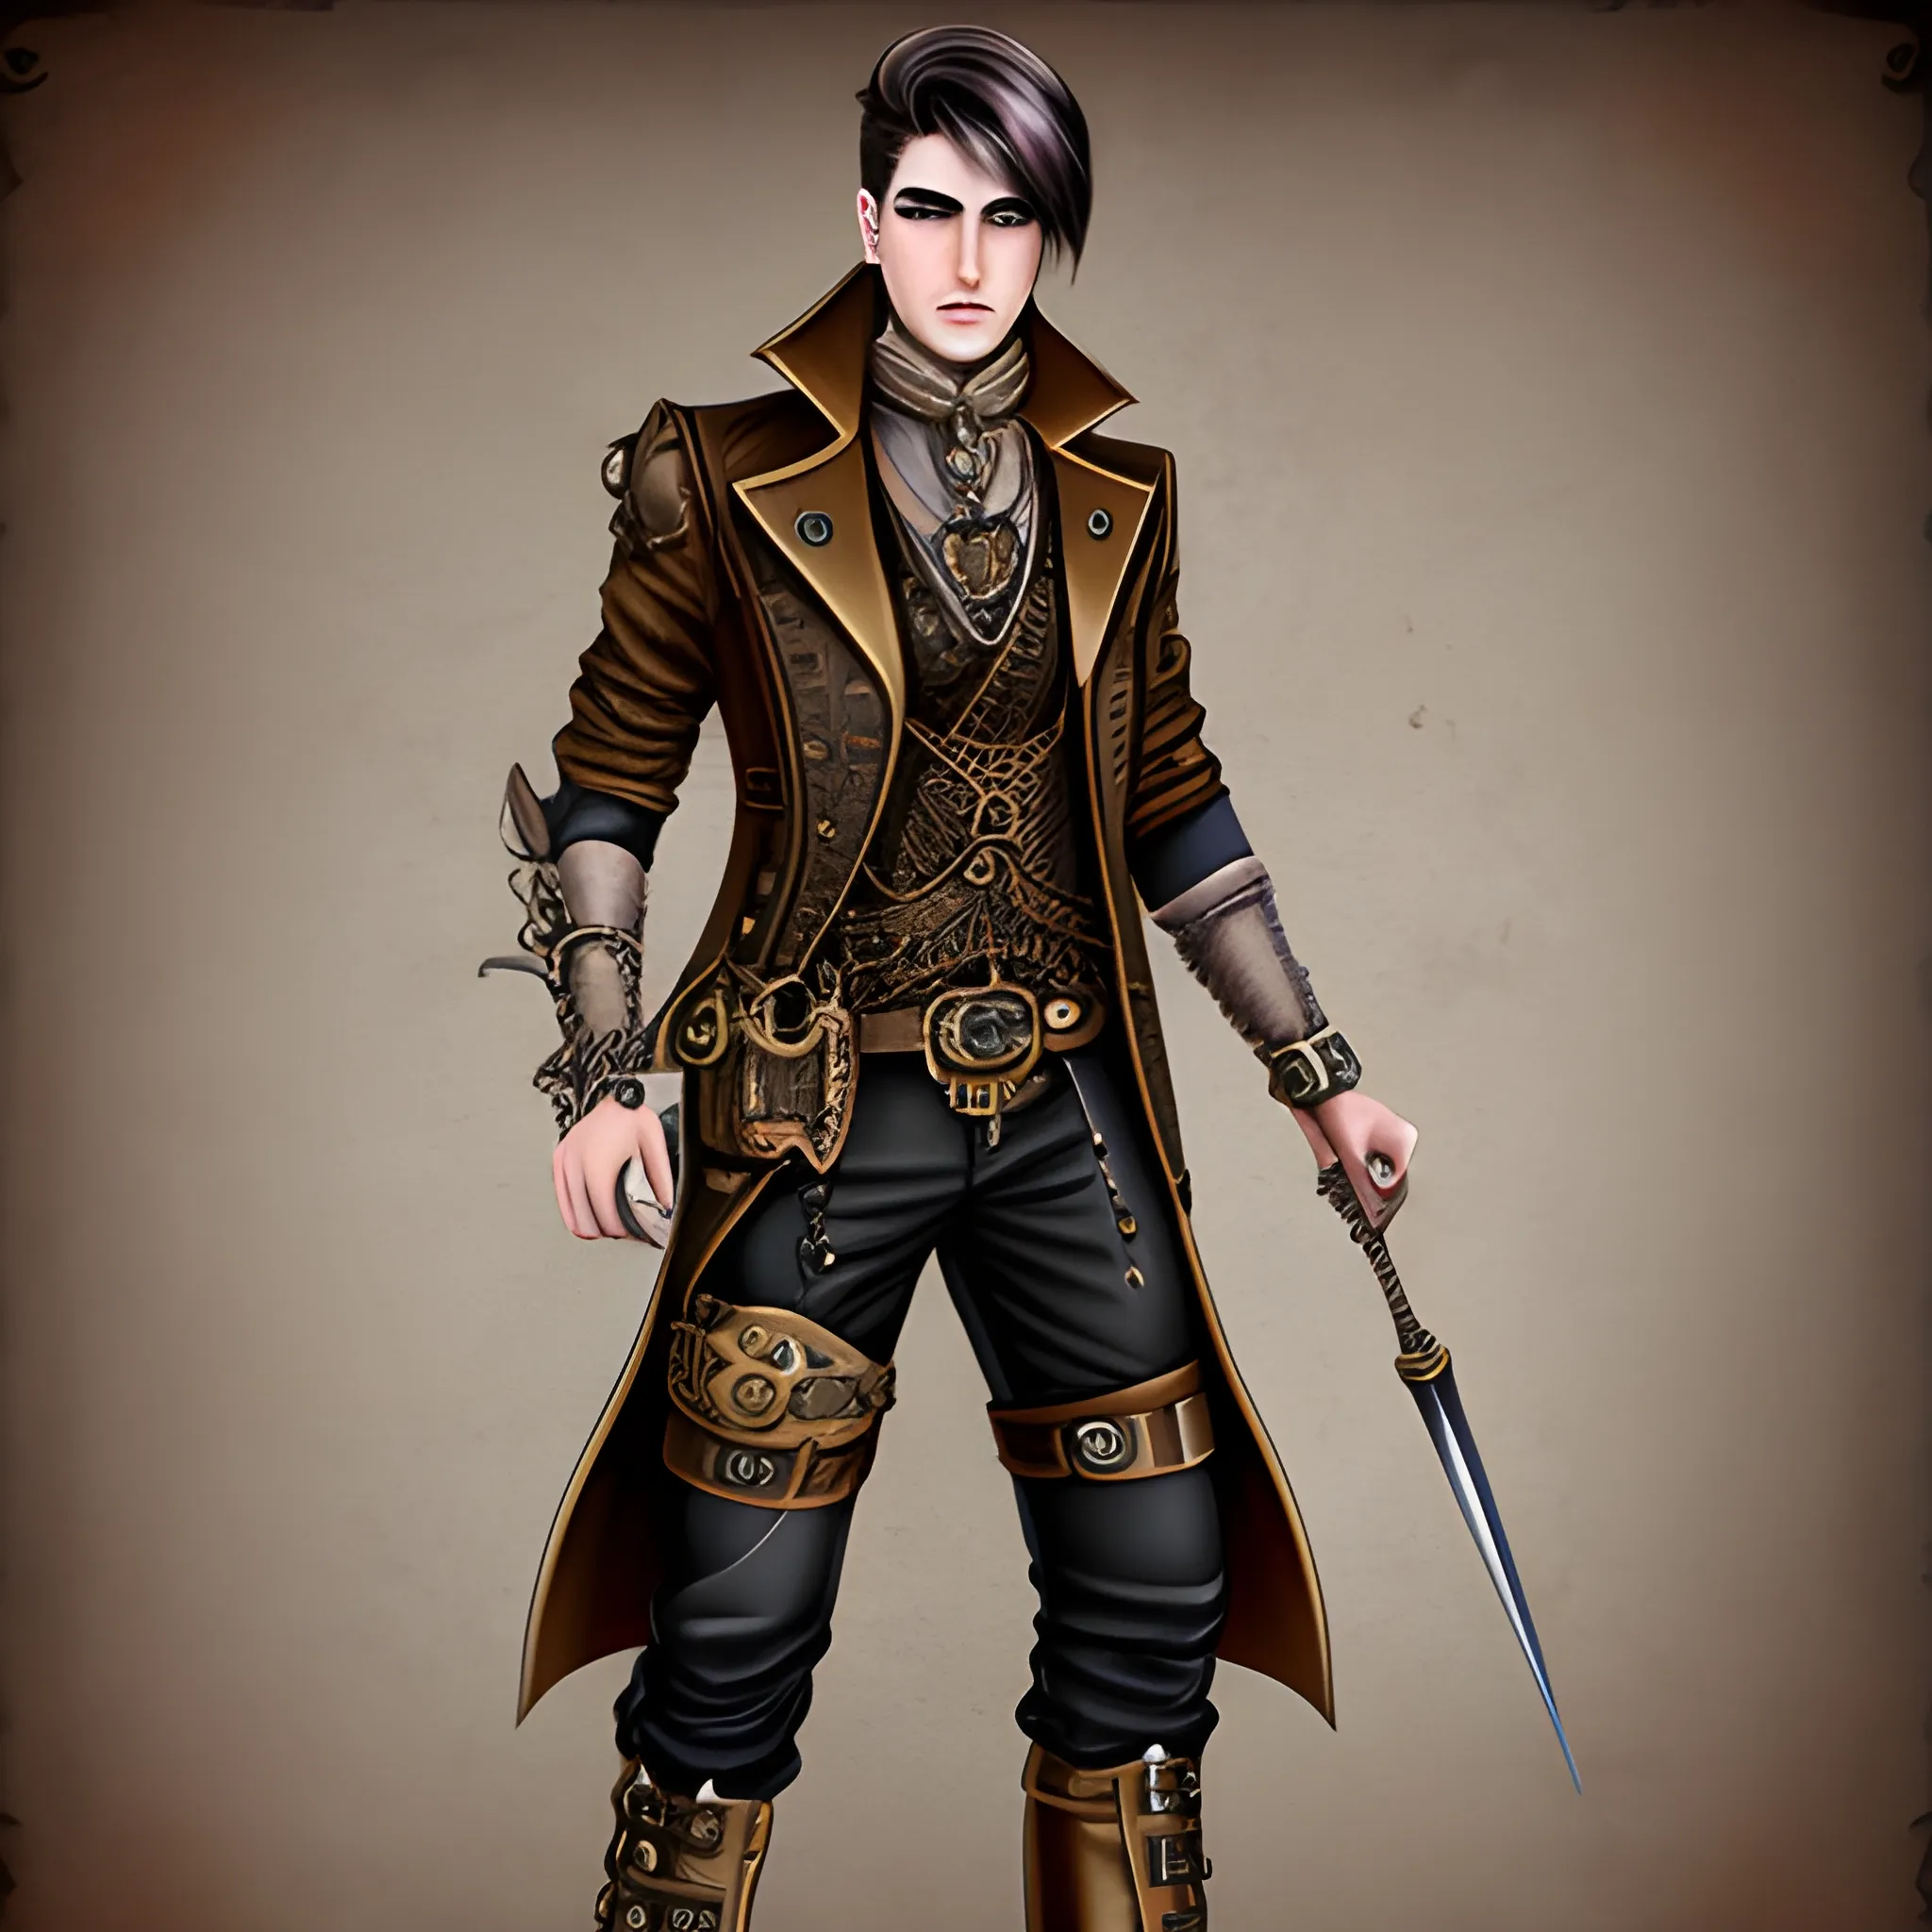 Male fantasy steampunk outfit

, Cartoon